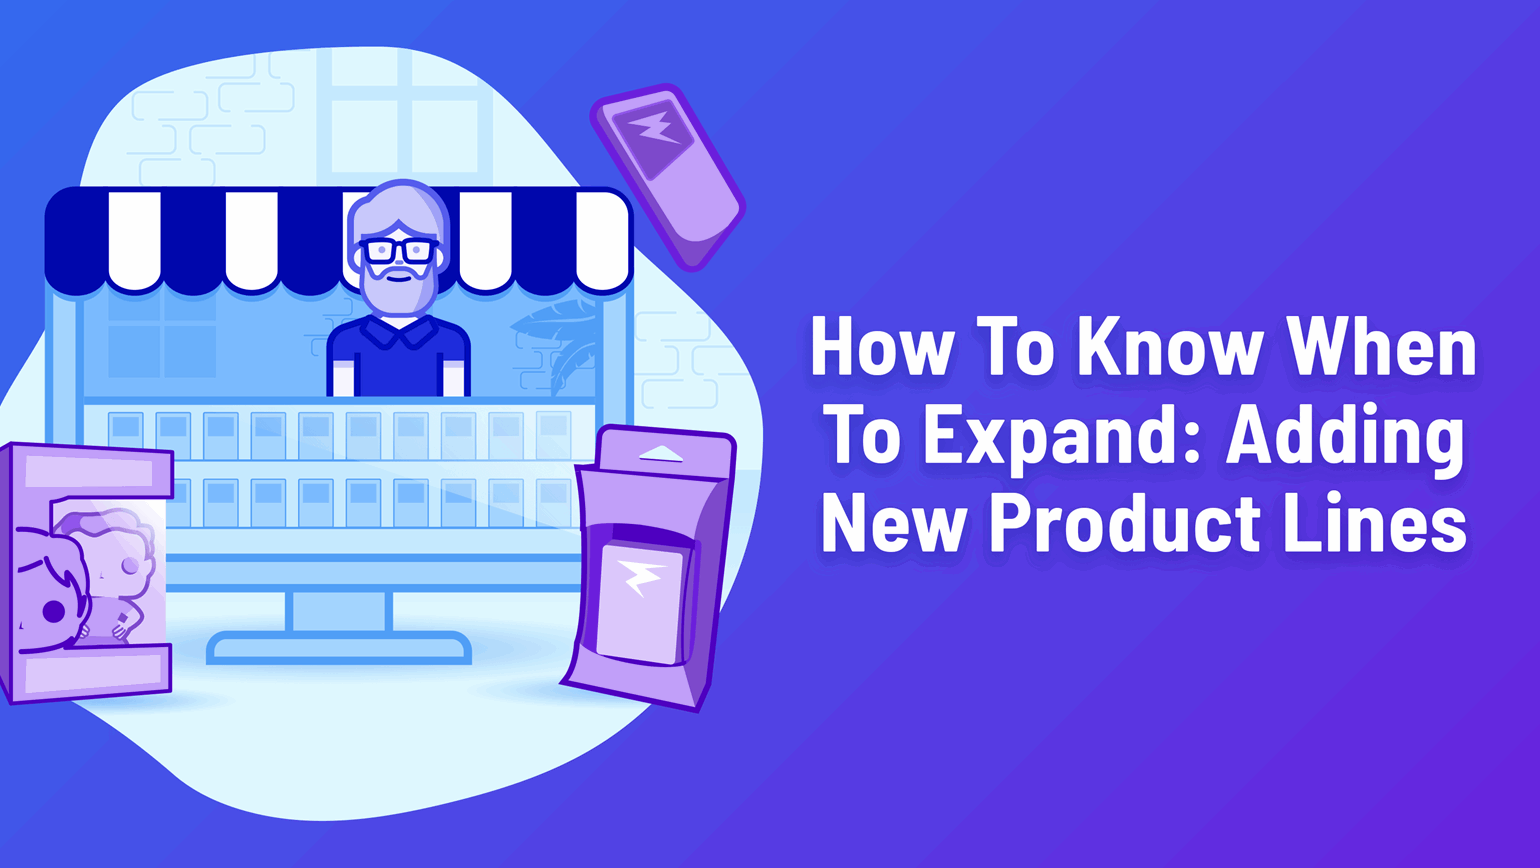 How To Know When To Expand: Adding New Product Lines